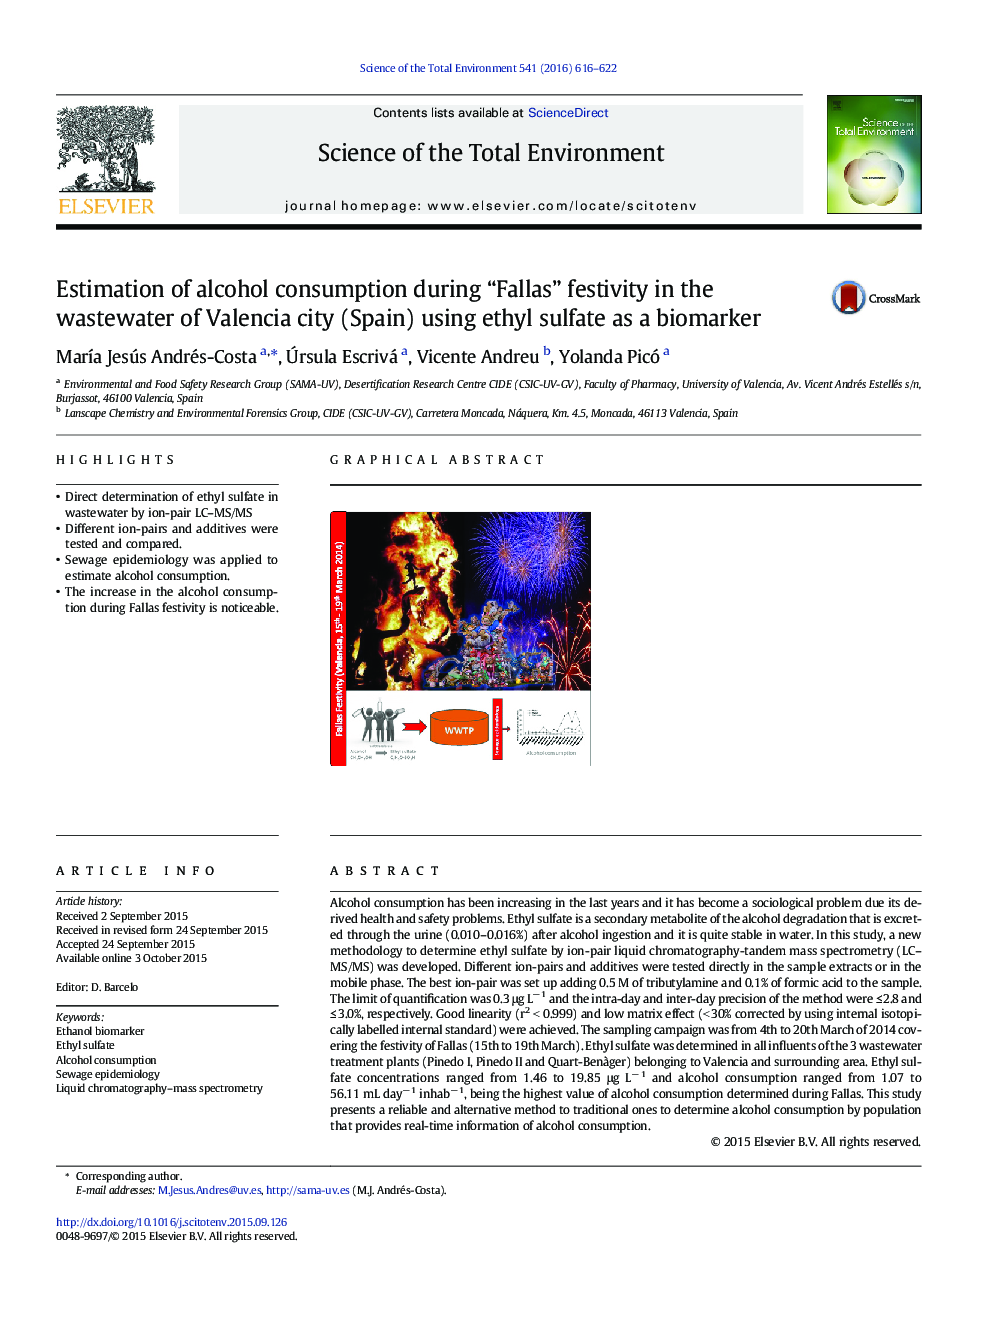 Estimation of alcohol consumption during “Fallas” festivity in the wastewater of Valencia city (Spain) using ethyl sulfate as a biomarker